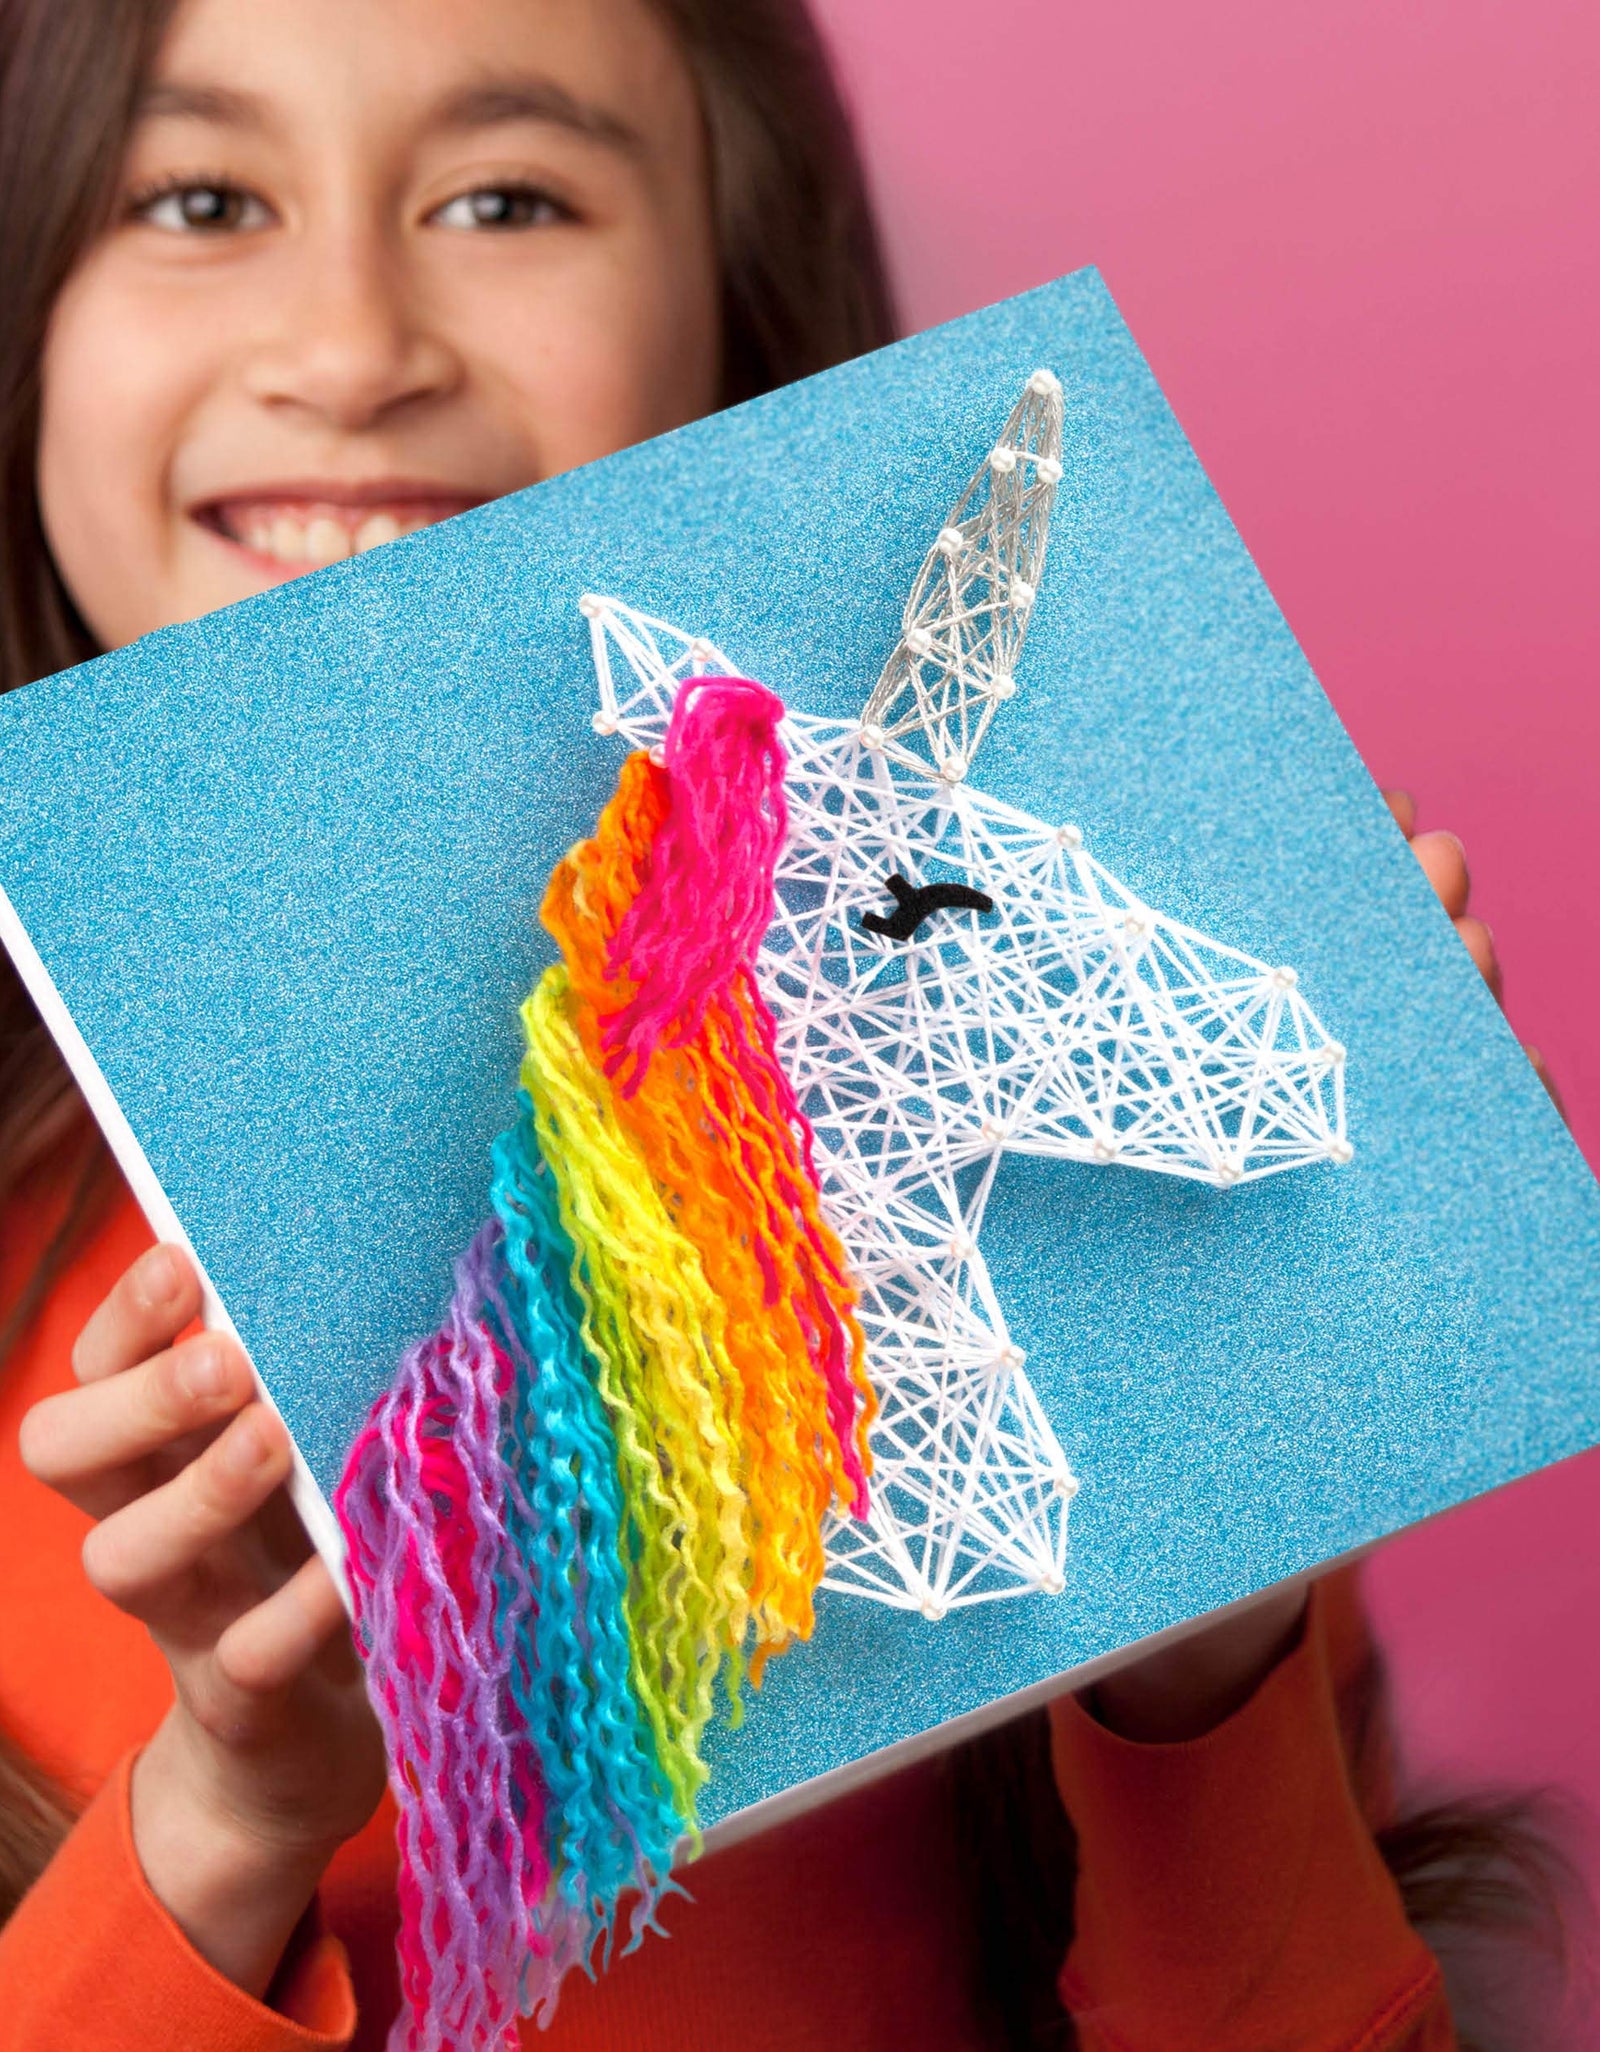 Craft-tastic DIY String Art – Award-Winning Craft Kit for Kids – Everything Included for 2 Fun Arts & Crafts Projects – Unicorn Series